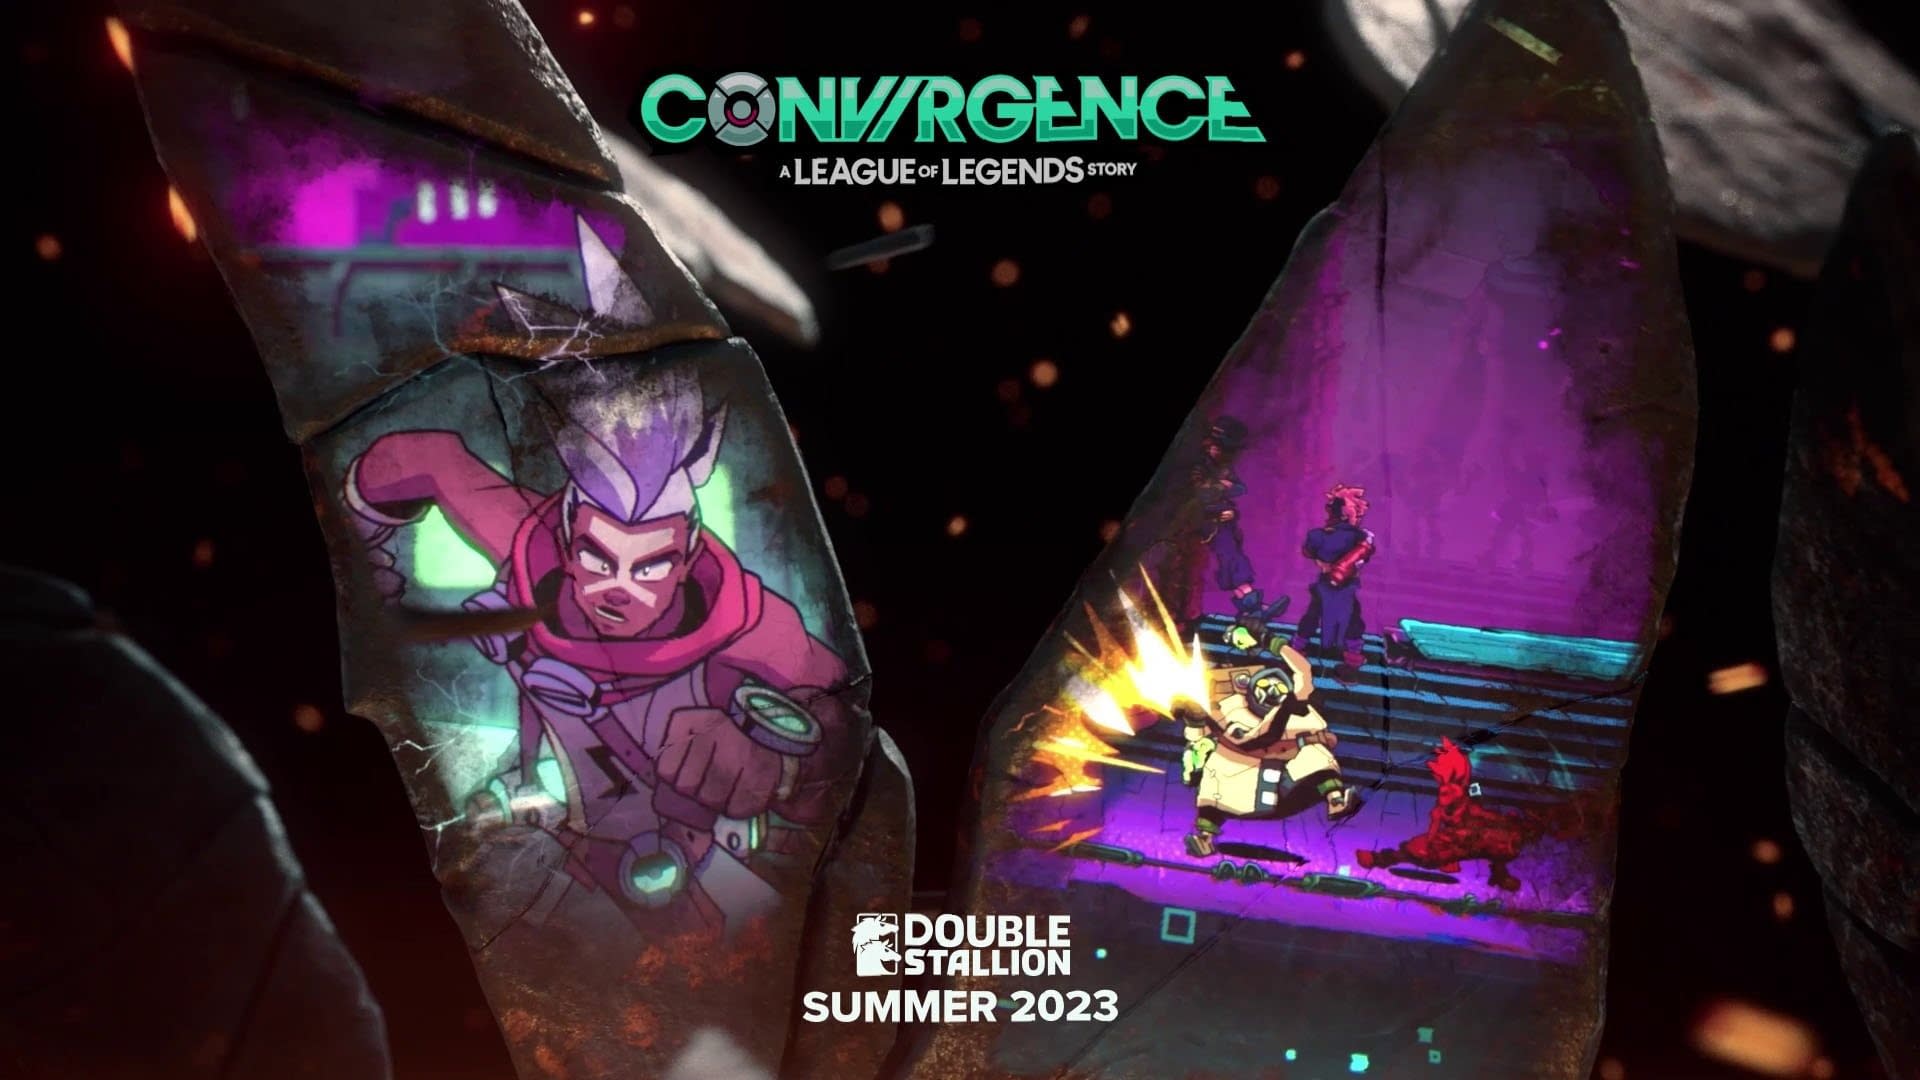 Lol Game CONV/RGENCE Released Date Announced